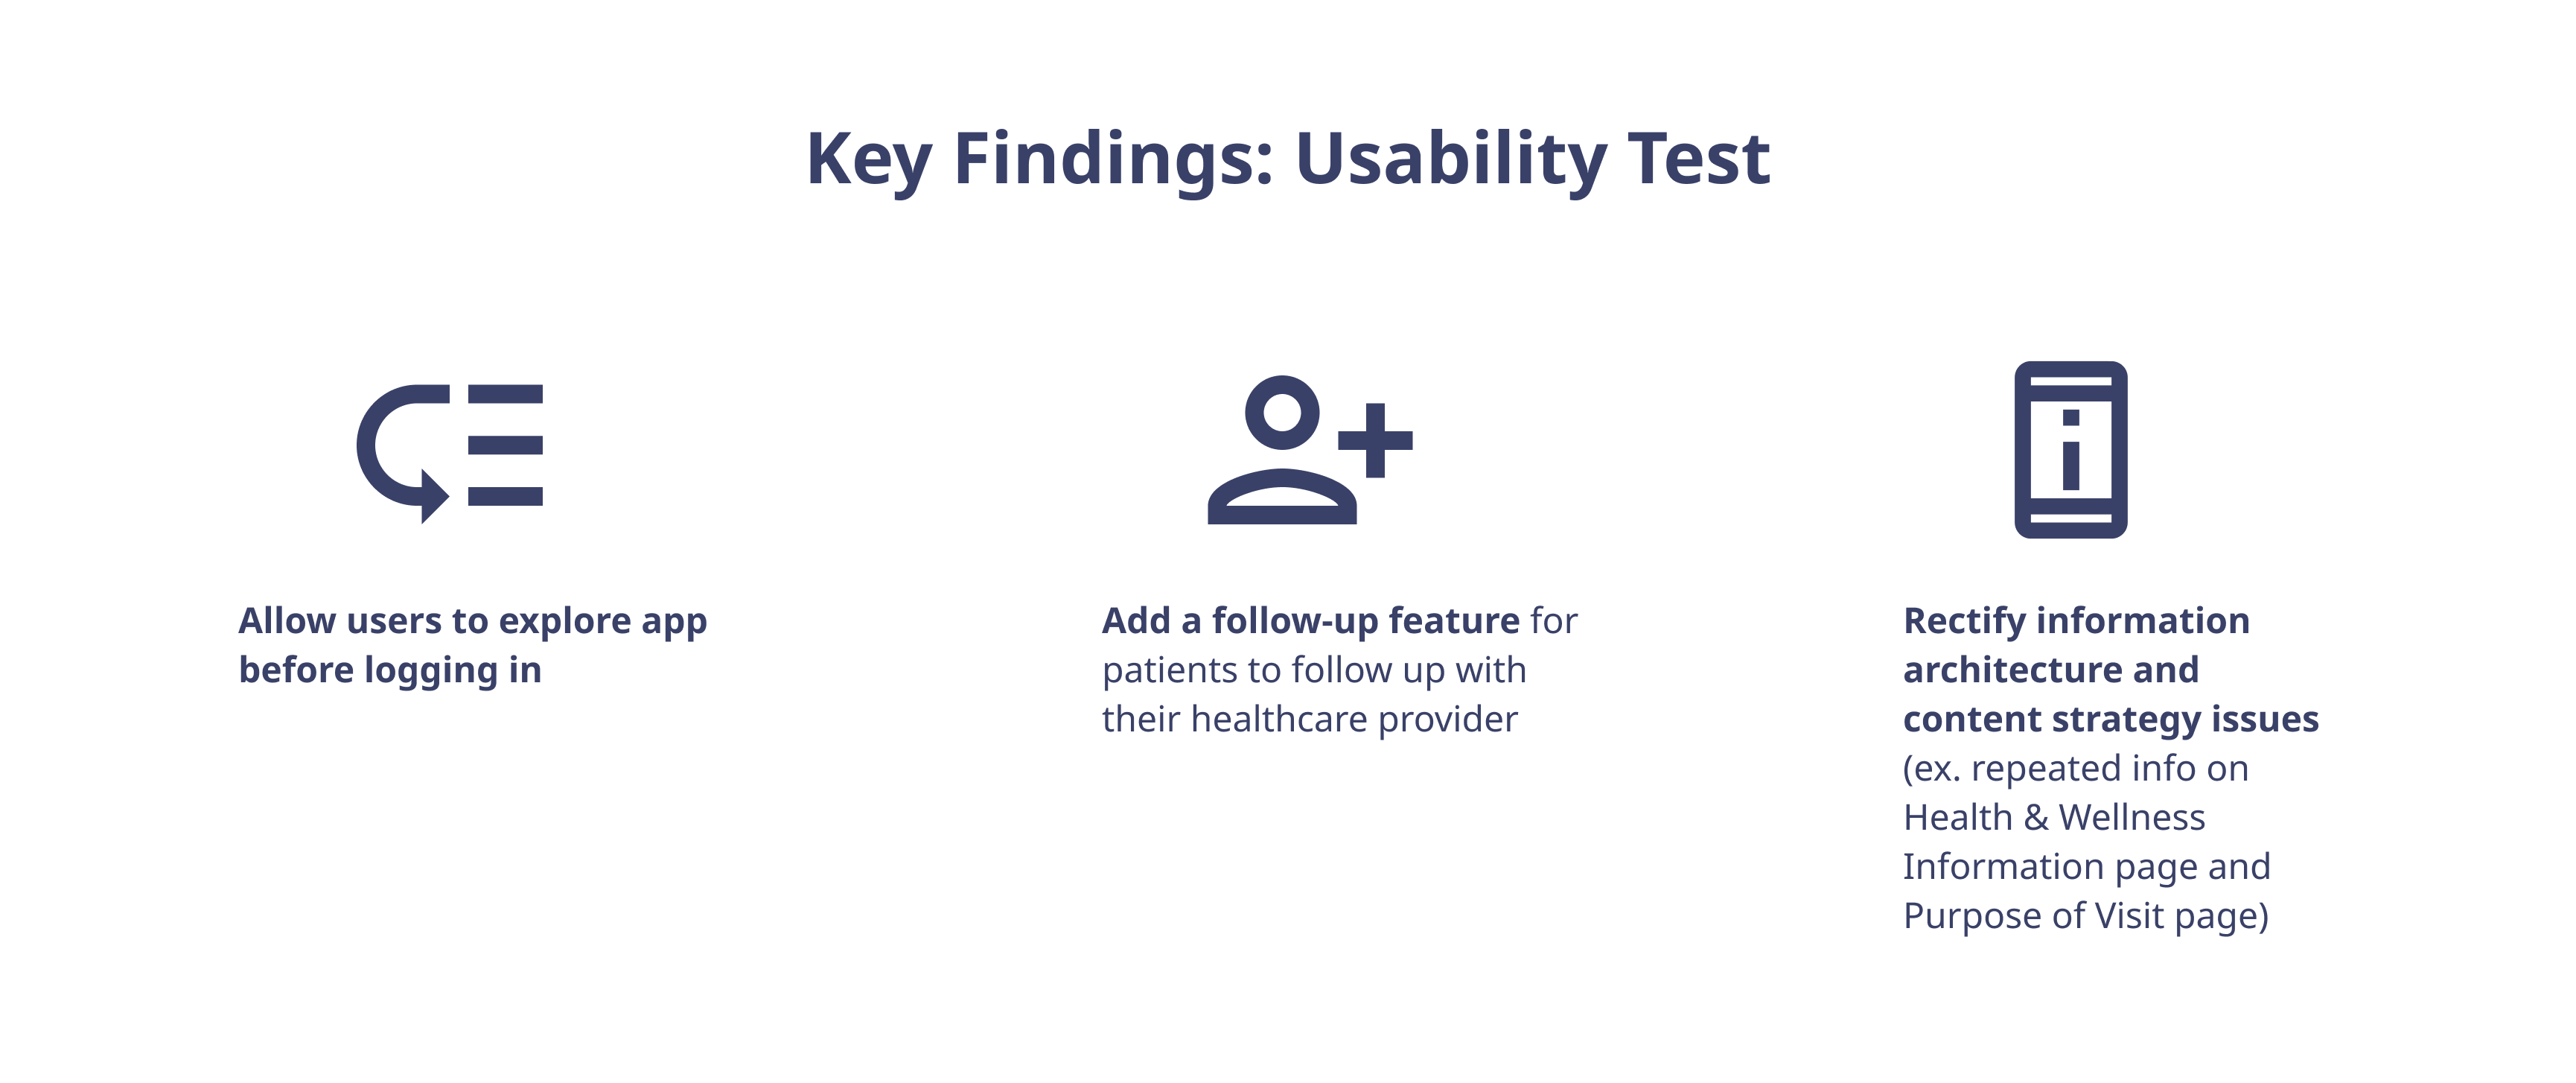 Usability testing key findings infographic